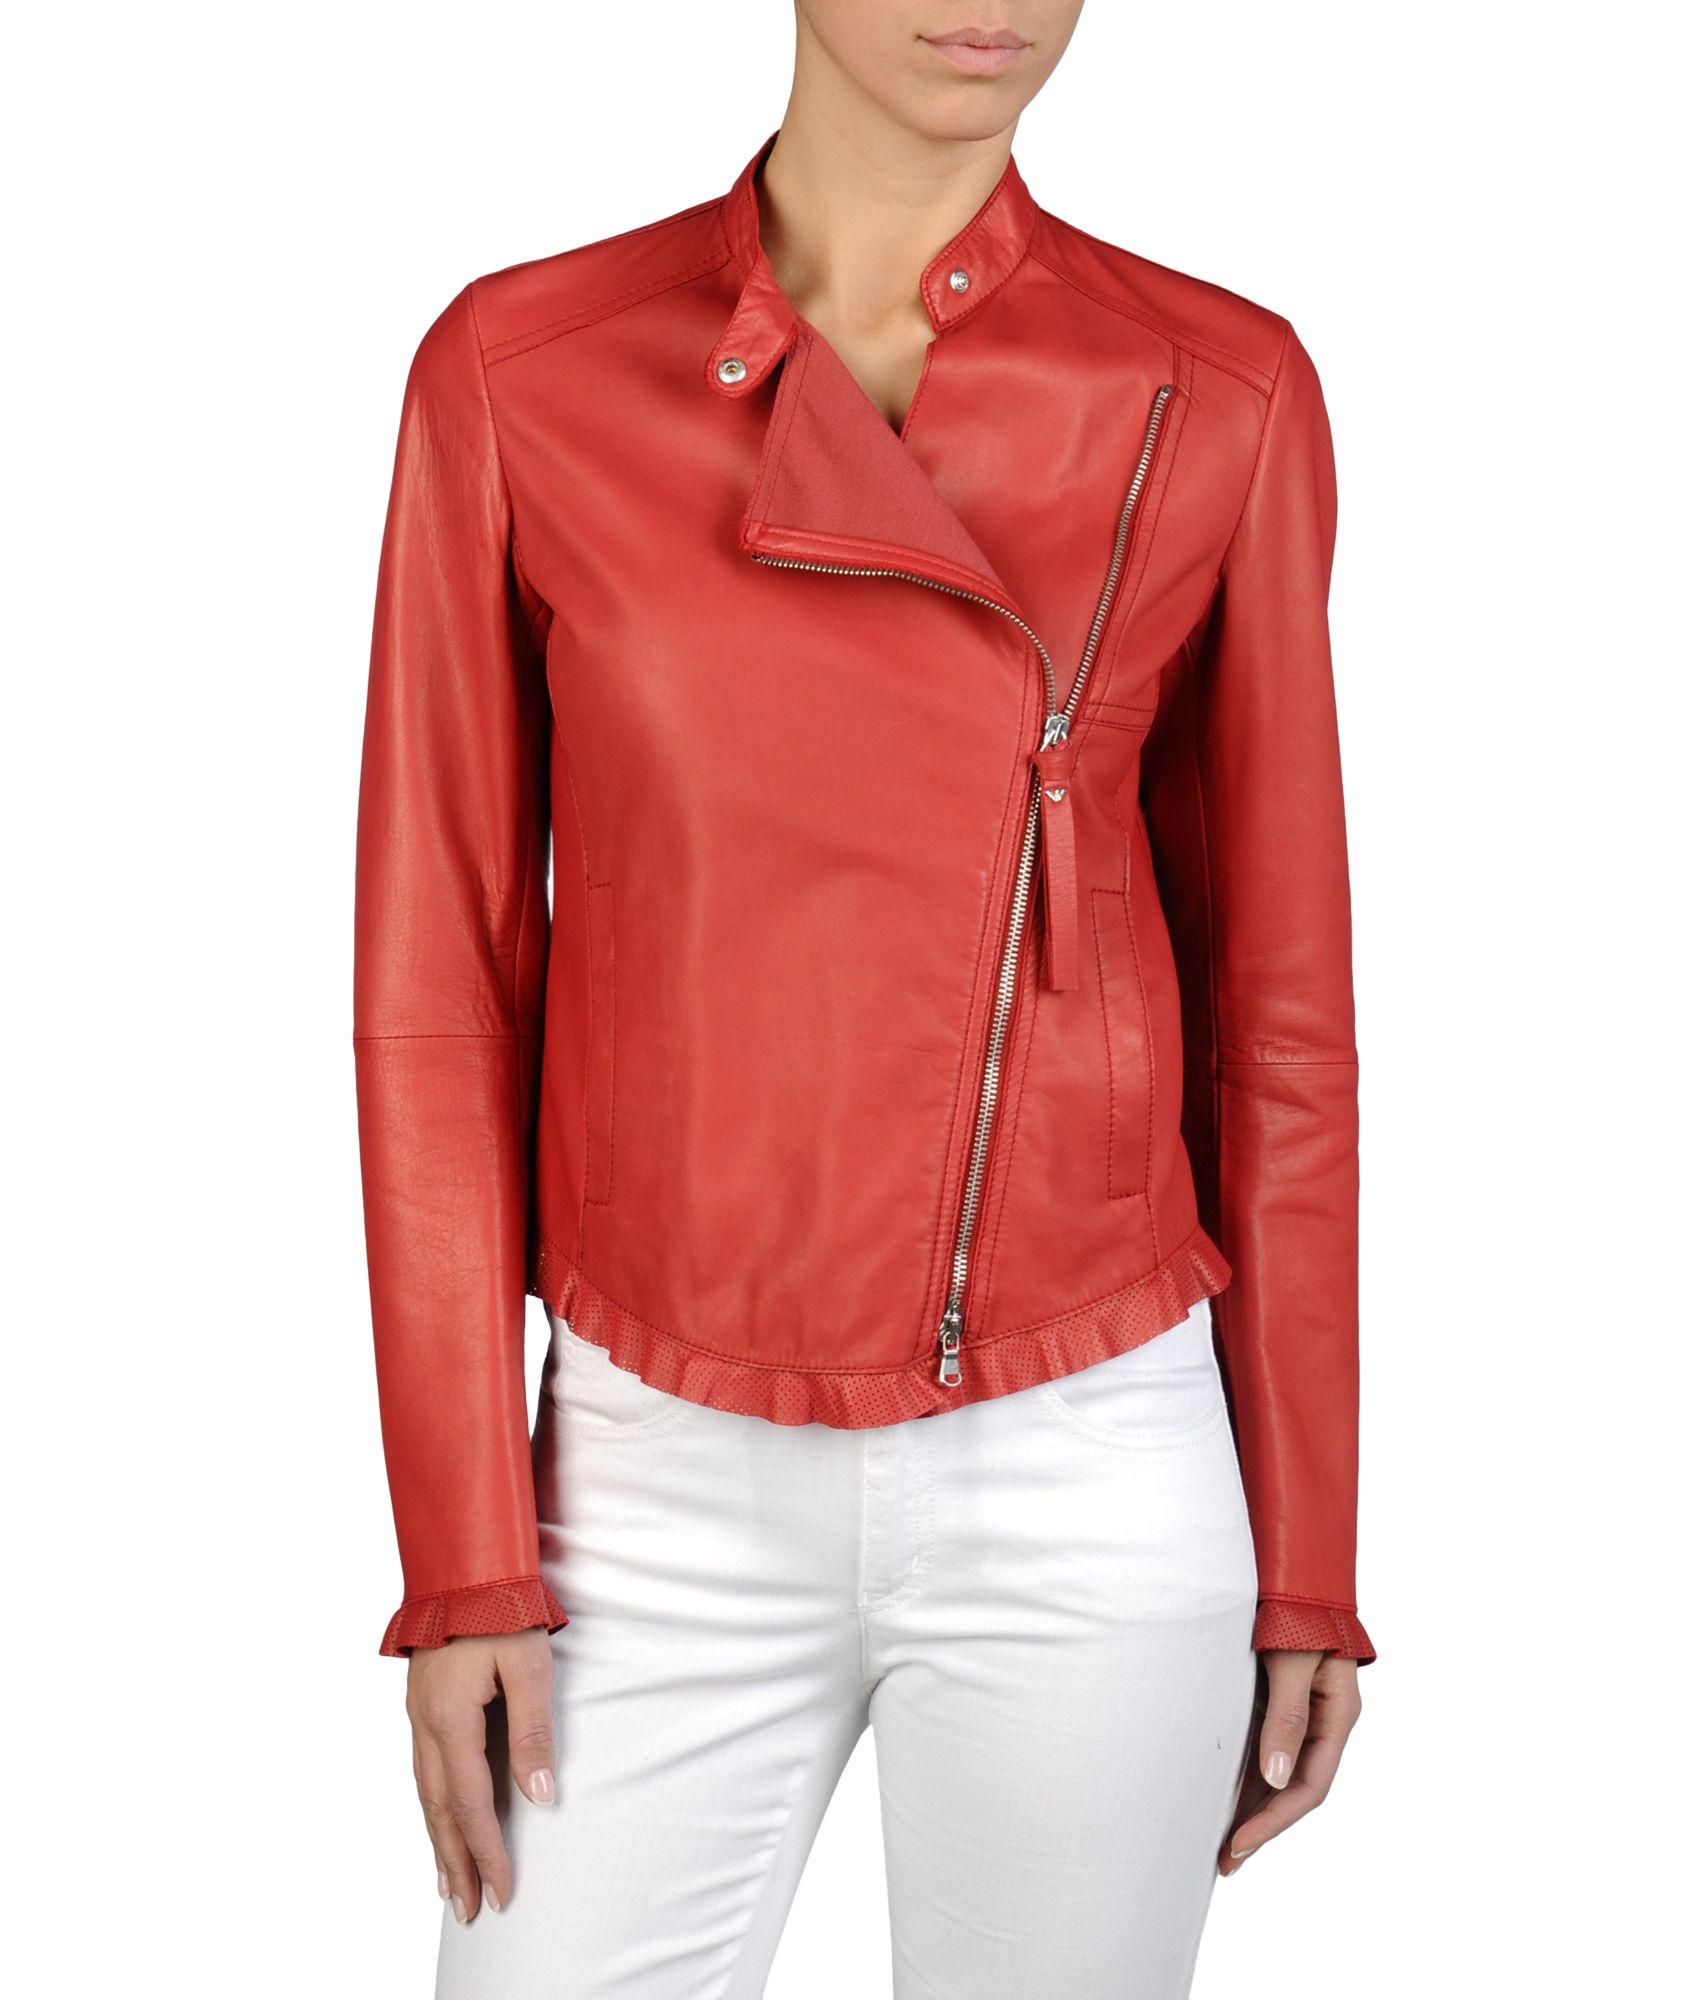 Armani Jeans Jacket in Hammered Leather with Side Zipper in Red | Lyst